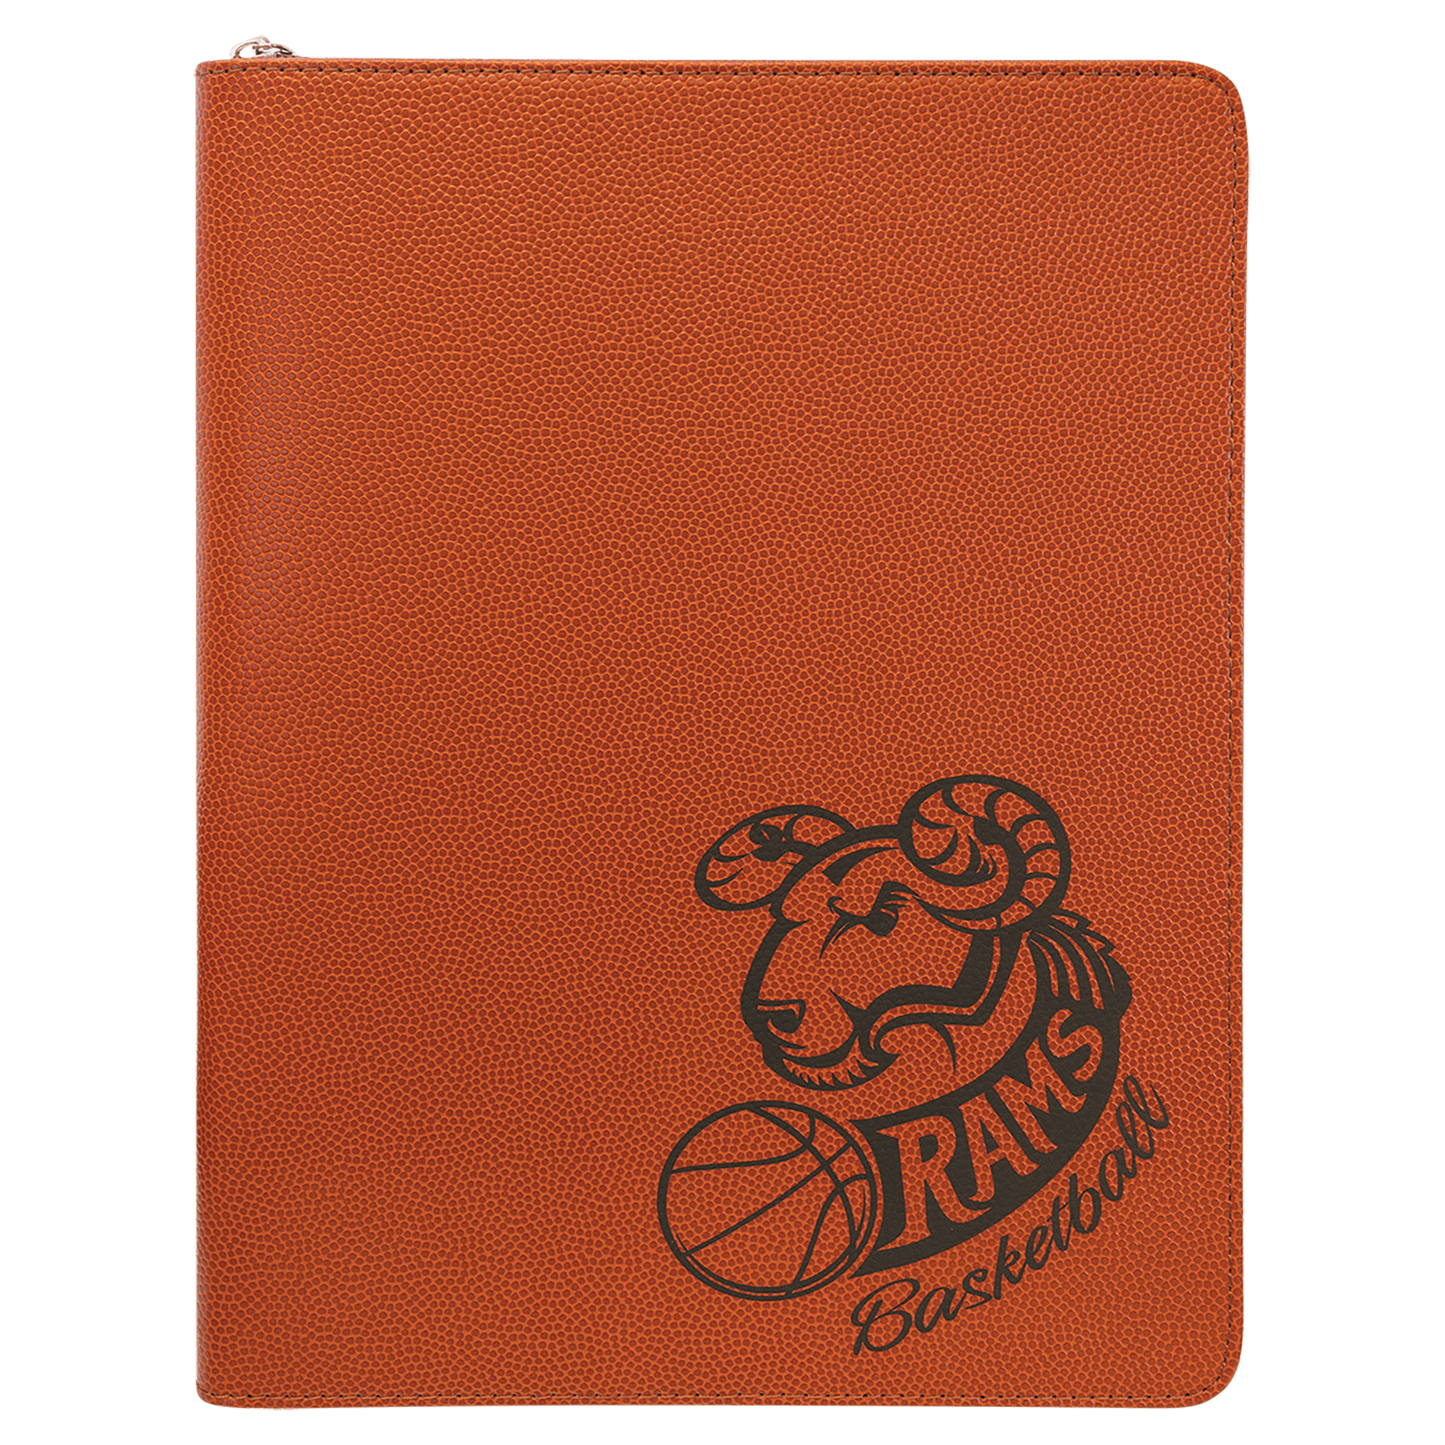 9 1/2" x 12" Basketball w/ Zipper Laserable Leatherette Portfolio with Notepad